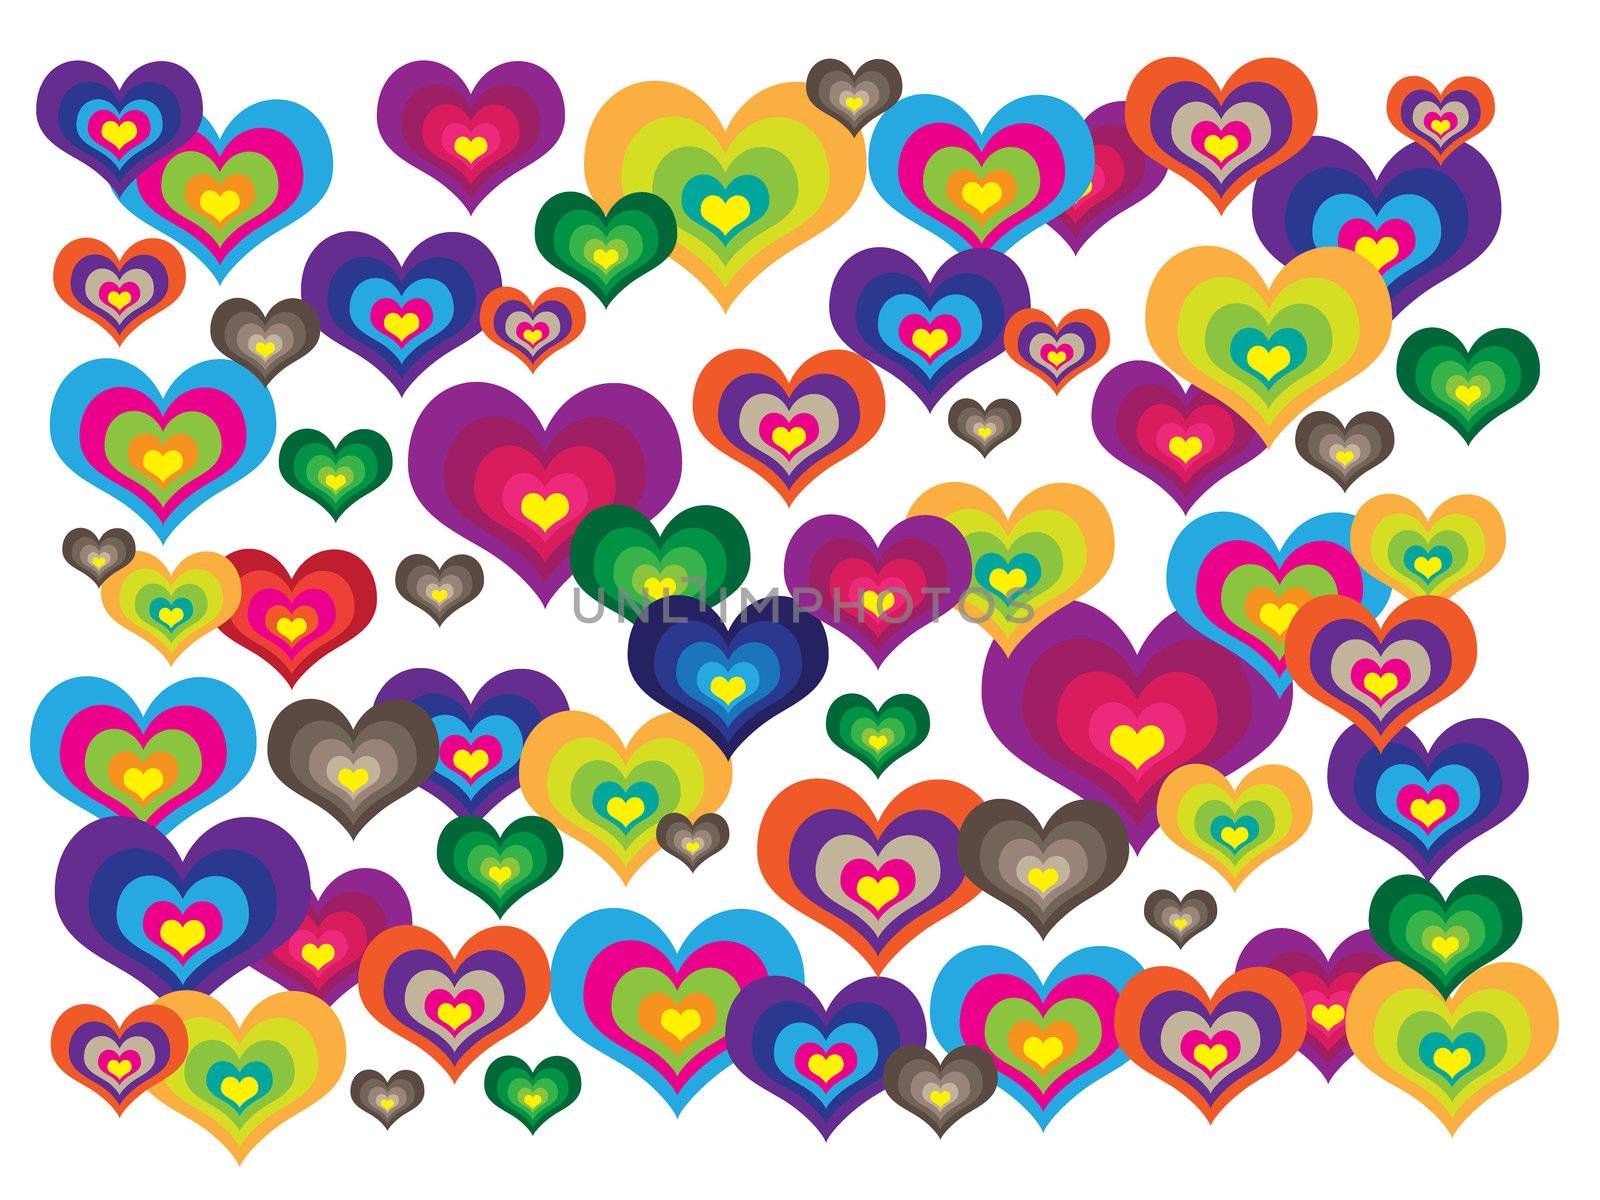 Differenst colorful hearts